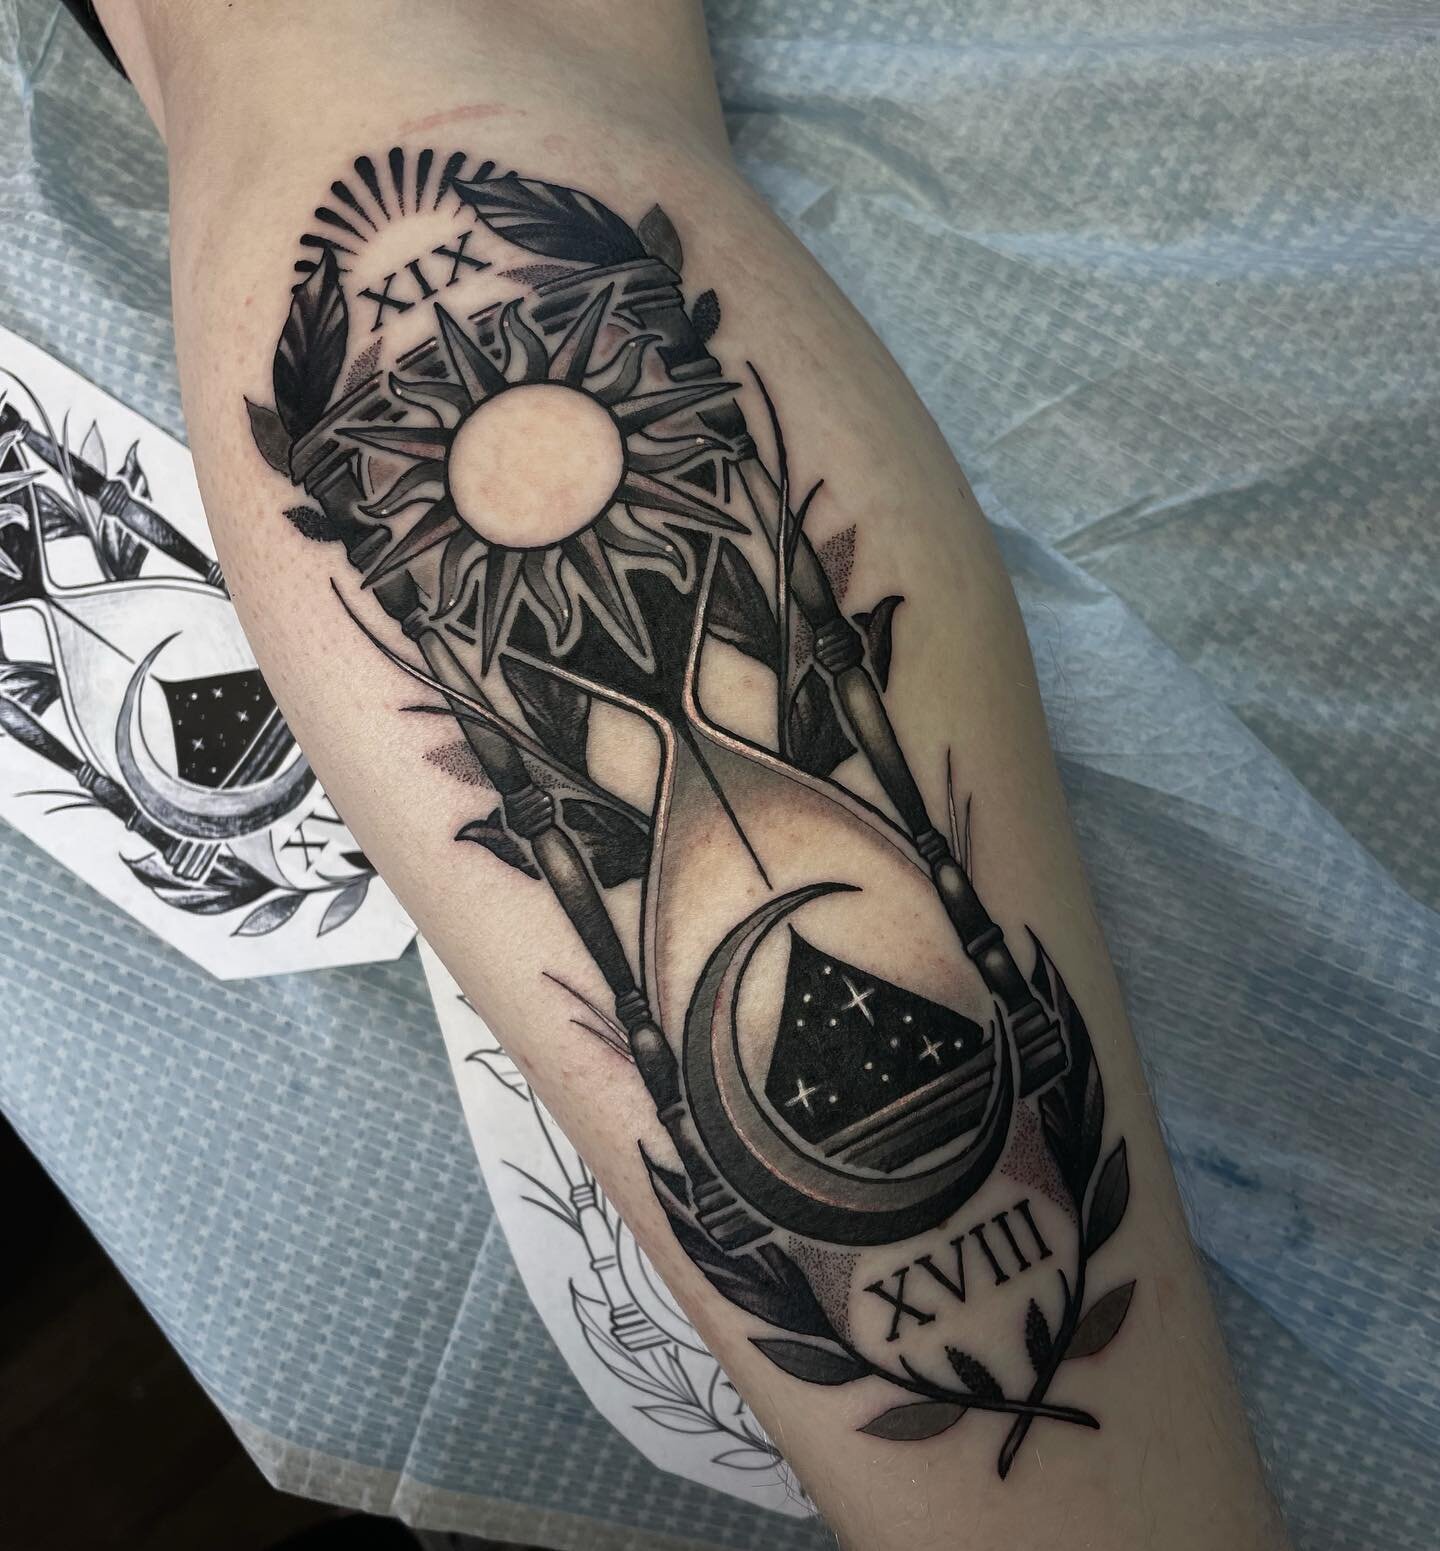 One from the other day :) 
.
.
.
. 
#tattoo #tattoos #ink #blackandgray #hourglass #hourglasstattoo